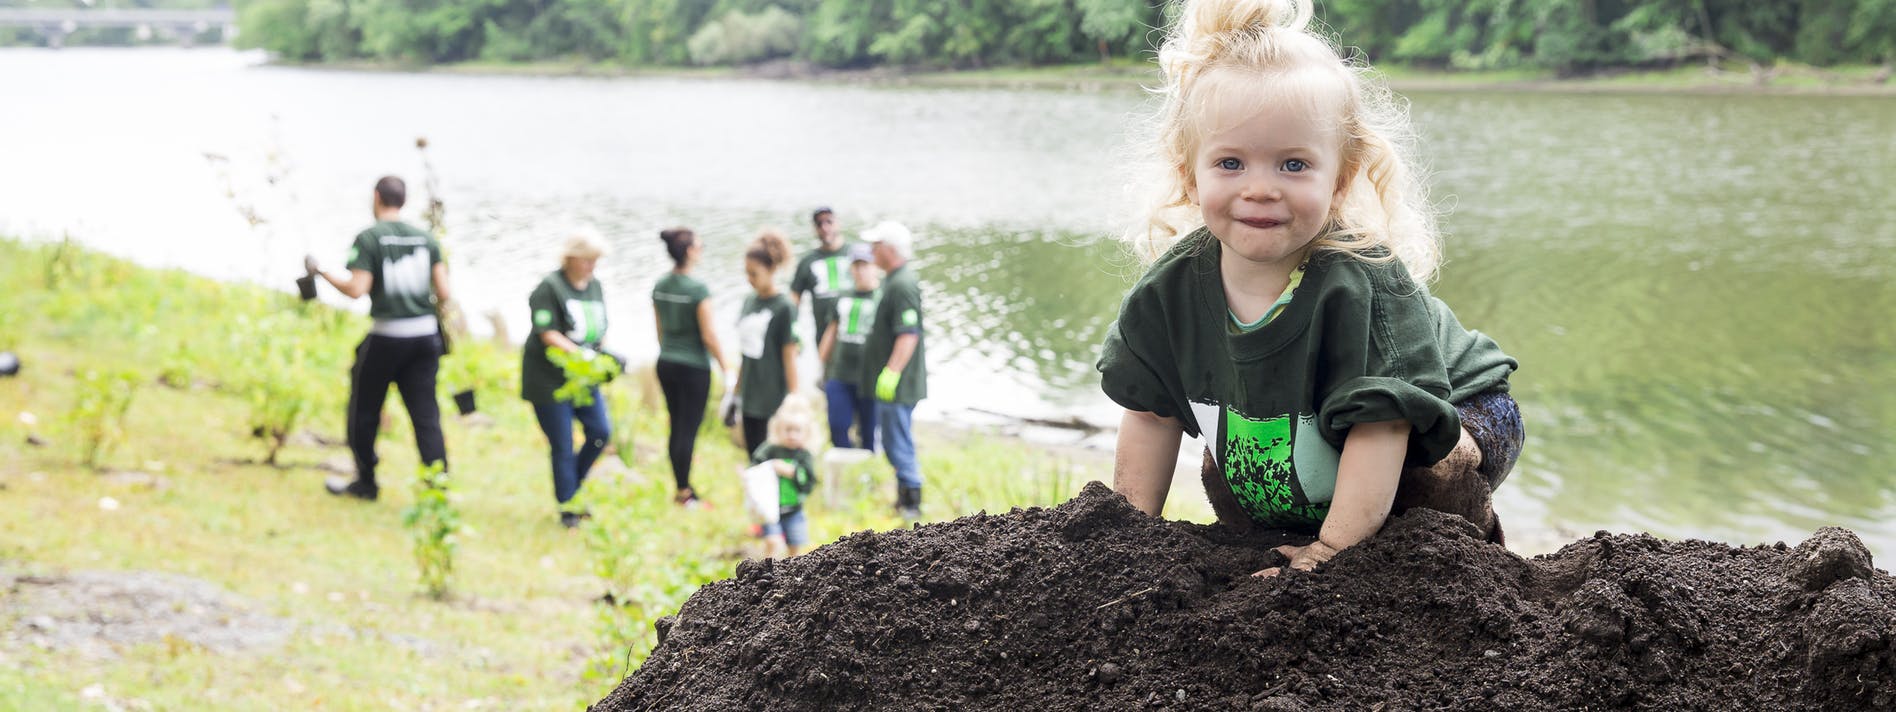 Little girl climbing on a pile of planting soil while volunteers plant trees